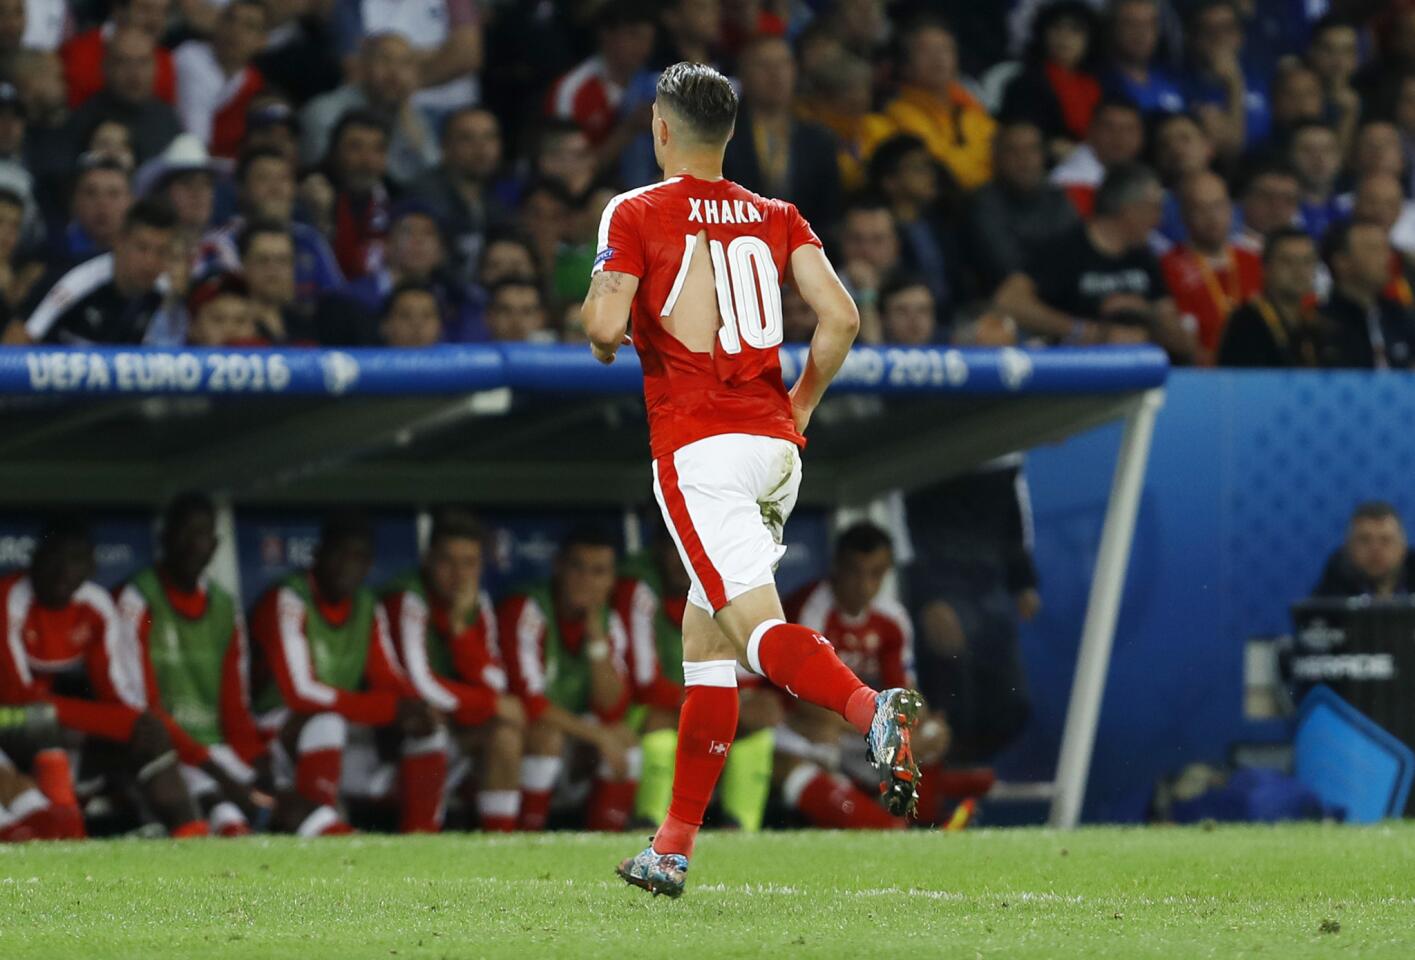 Switzerland's Granit Xhaka runs to the bench and change his ripped jersey during the Euro 2016 Group A soccer match between Switzerland and France at the Pierre Mauroy stadium in Villeneuve d'Ascq, near Lille, France, Sunday, June 19, 2016. (AP Photo/Darko Vojinovic)